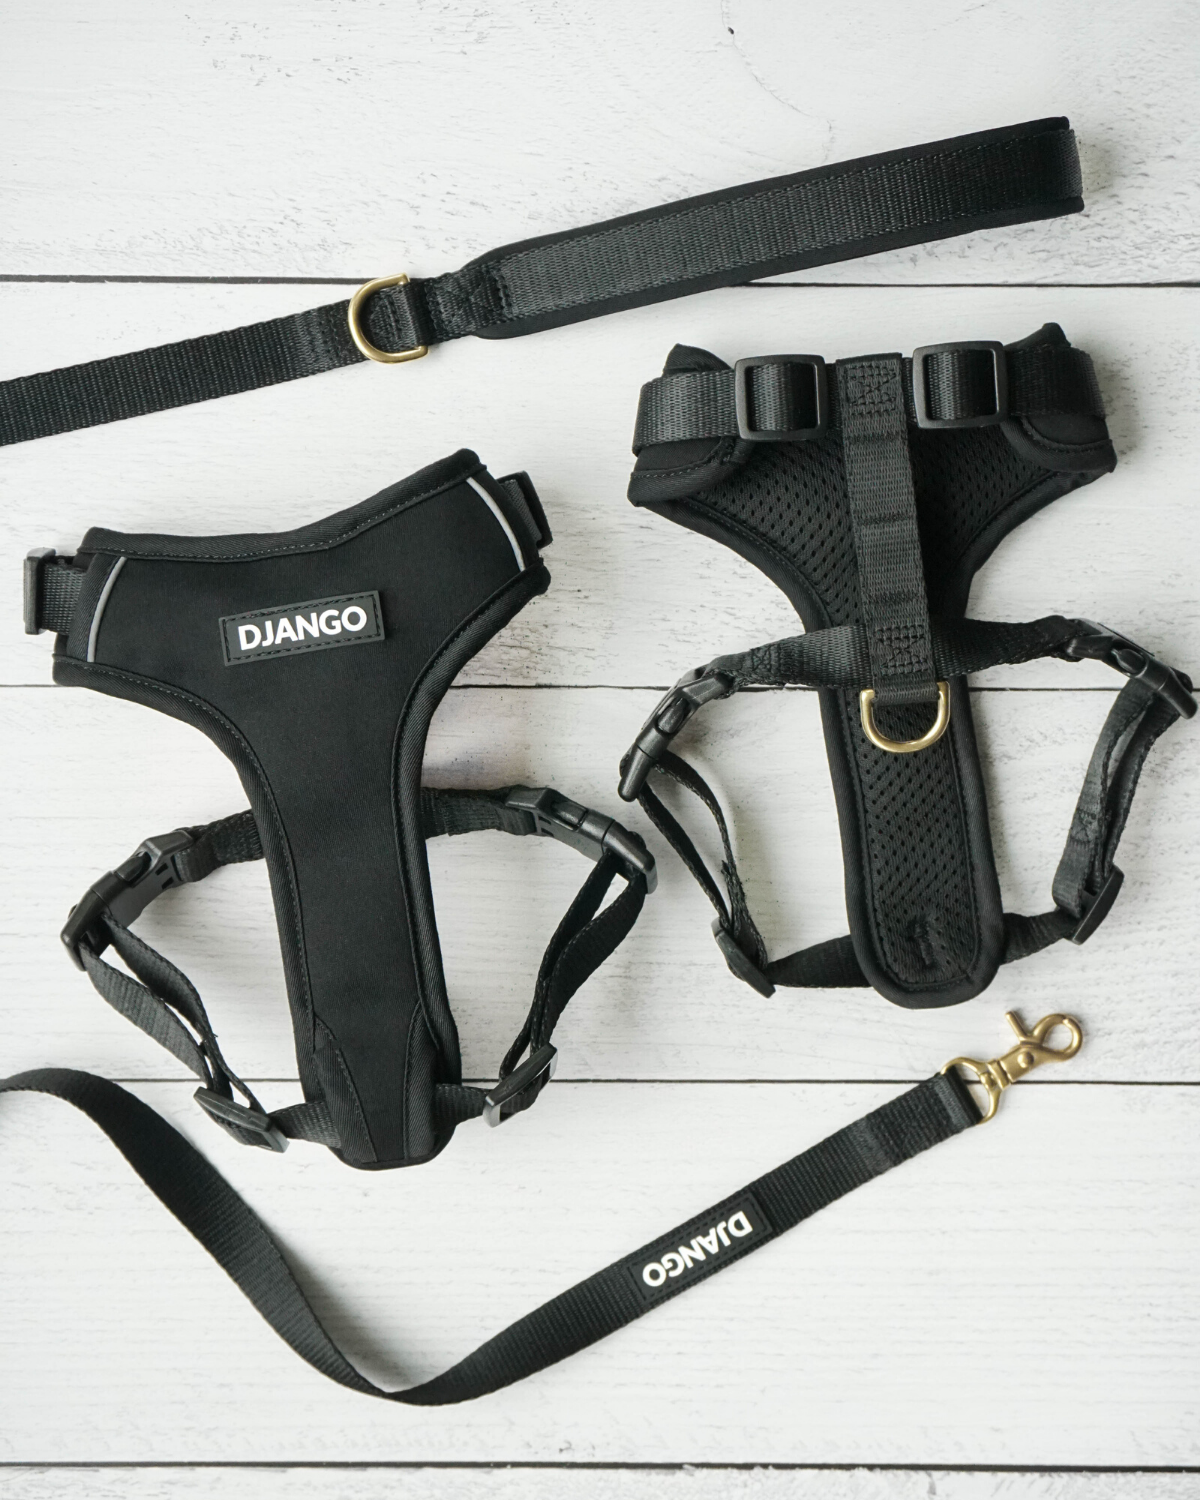 Pair your DJANGO Adventure Cat Harness with the matching Adventure Leash. Small and standard cat leash sizes are available for cats of all sizes - djangobrand.com